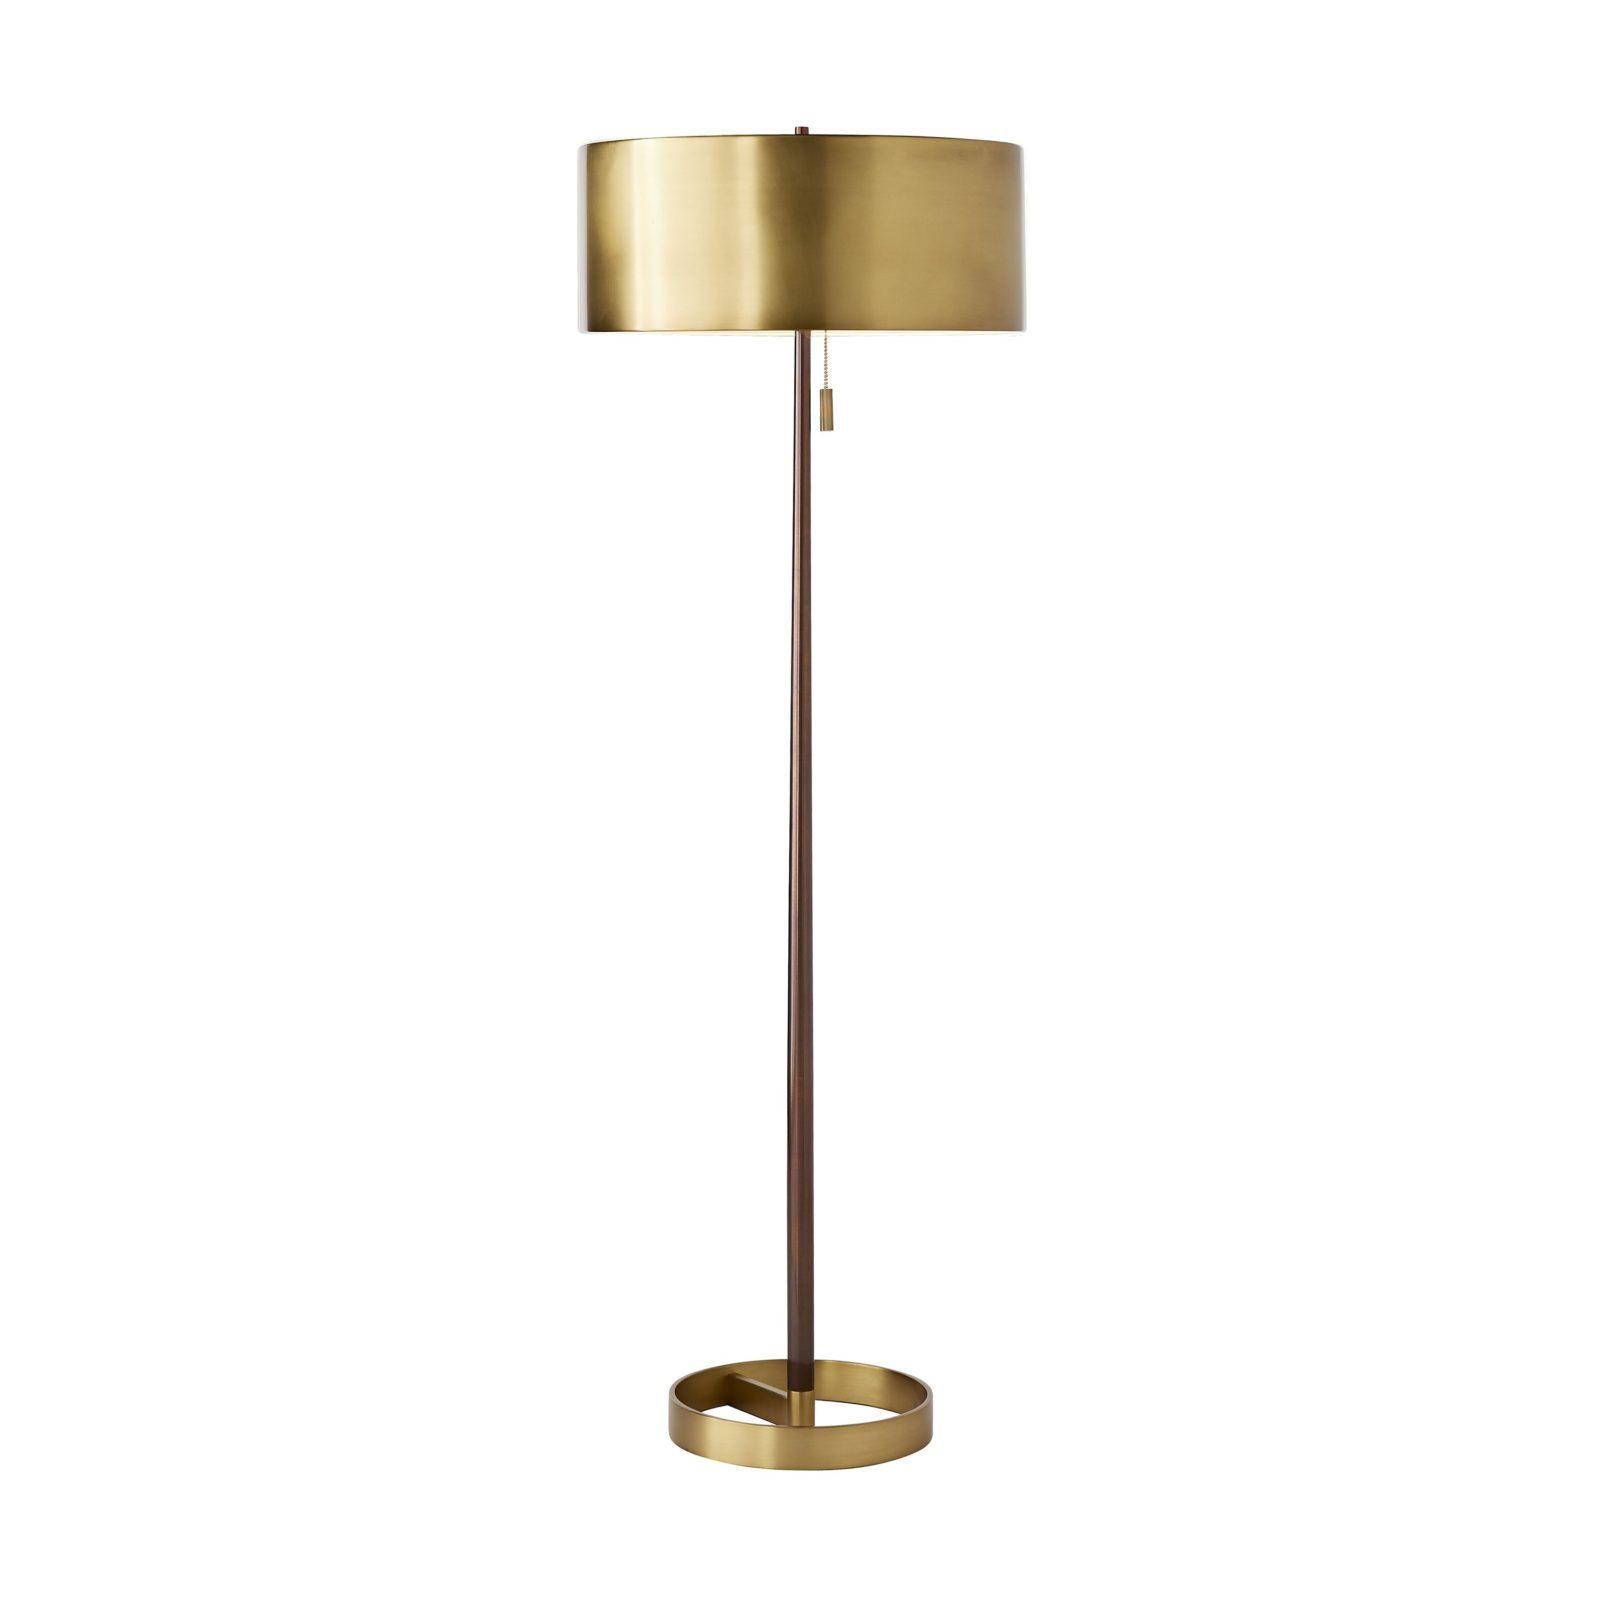 Antique Brass Floor Lamps Pertaining To Widely Used Antique Brass Floor Lamp – Modern Antique Brass Floor Lamp (View 2 of 15)